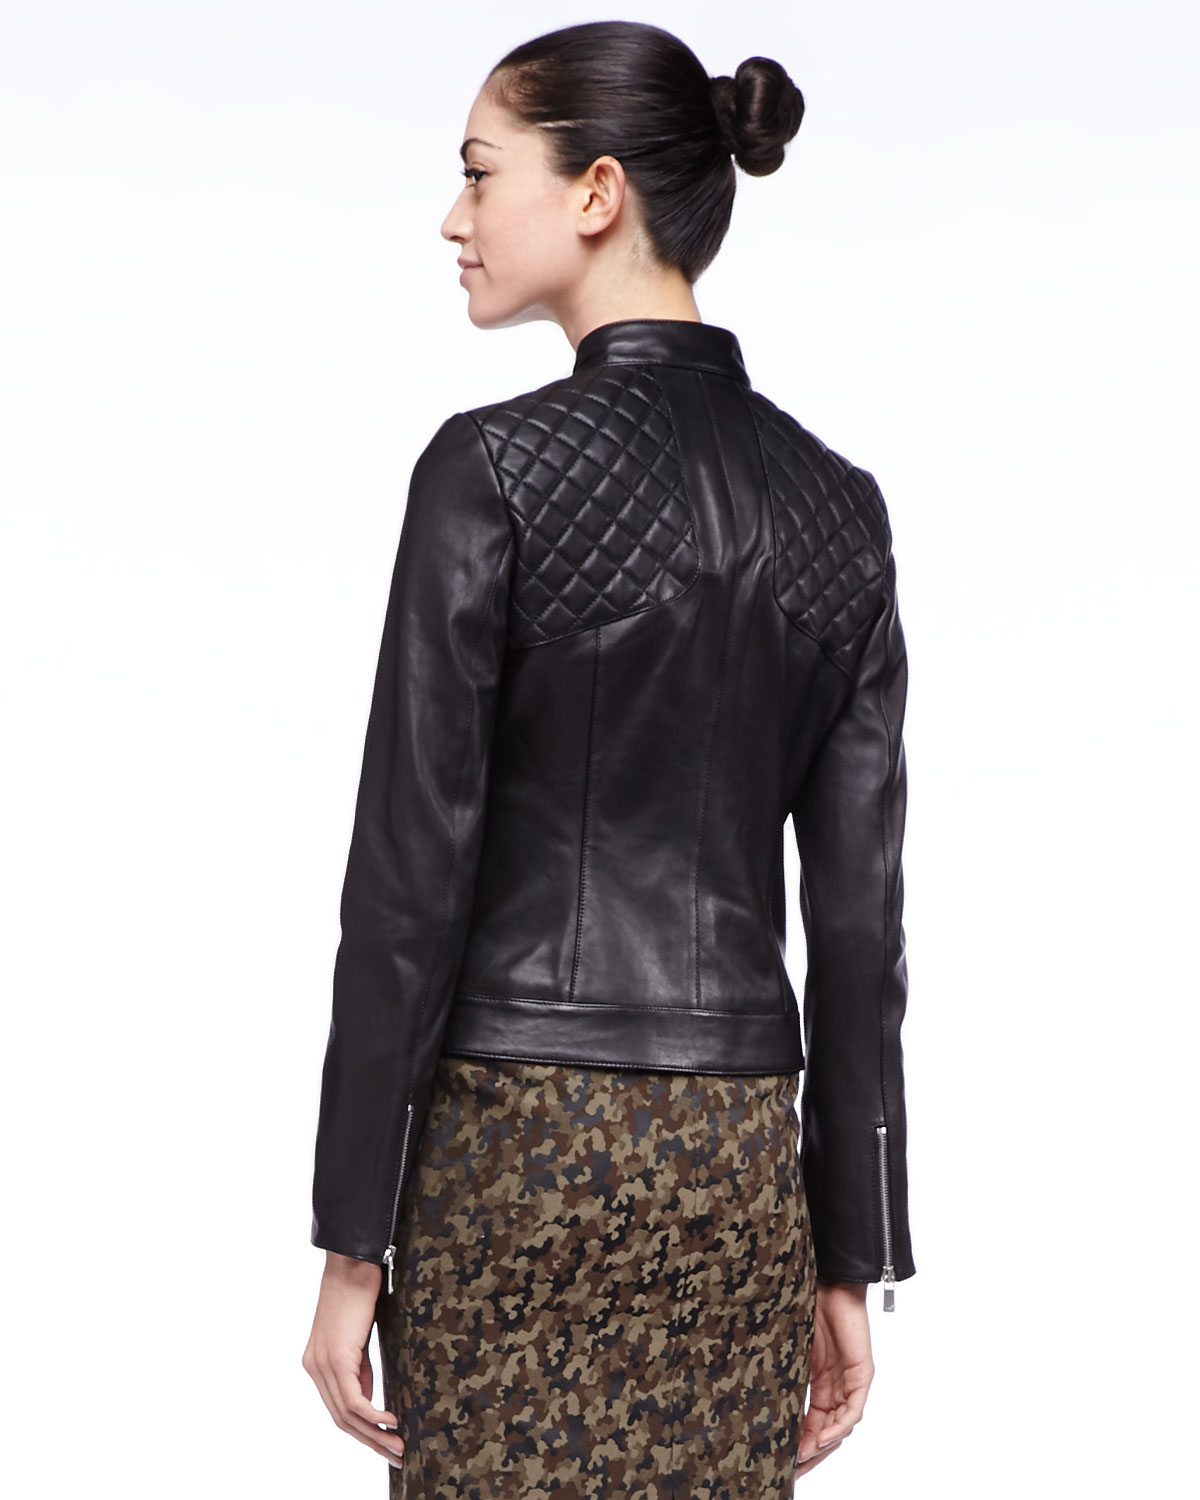 Lyst - Michael Kors Quilted Leather Jacket in Black